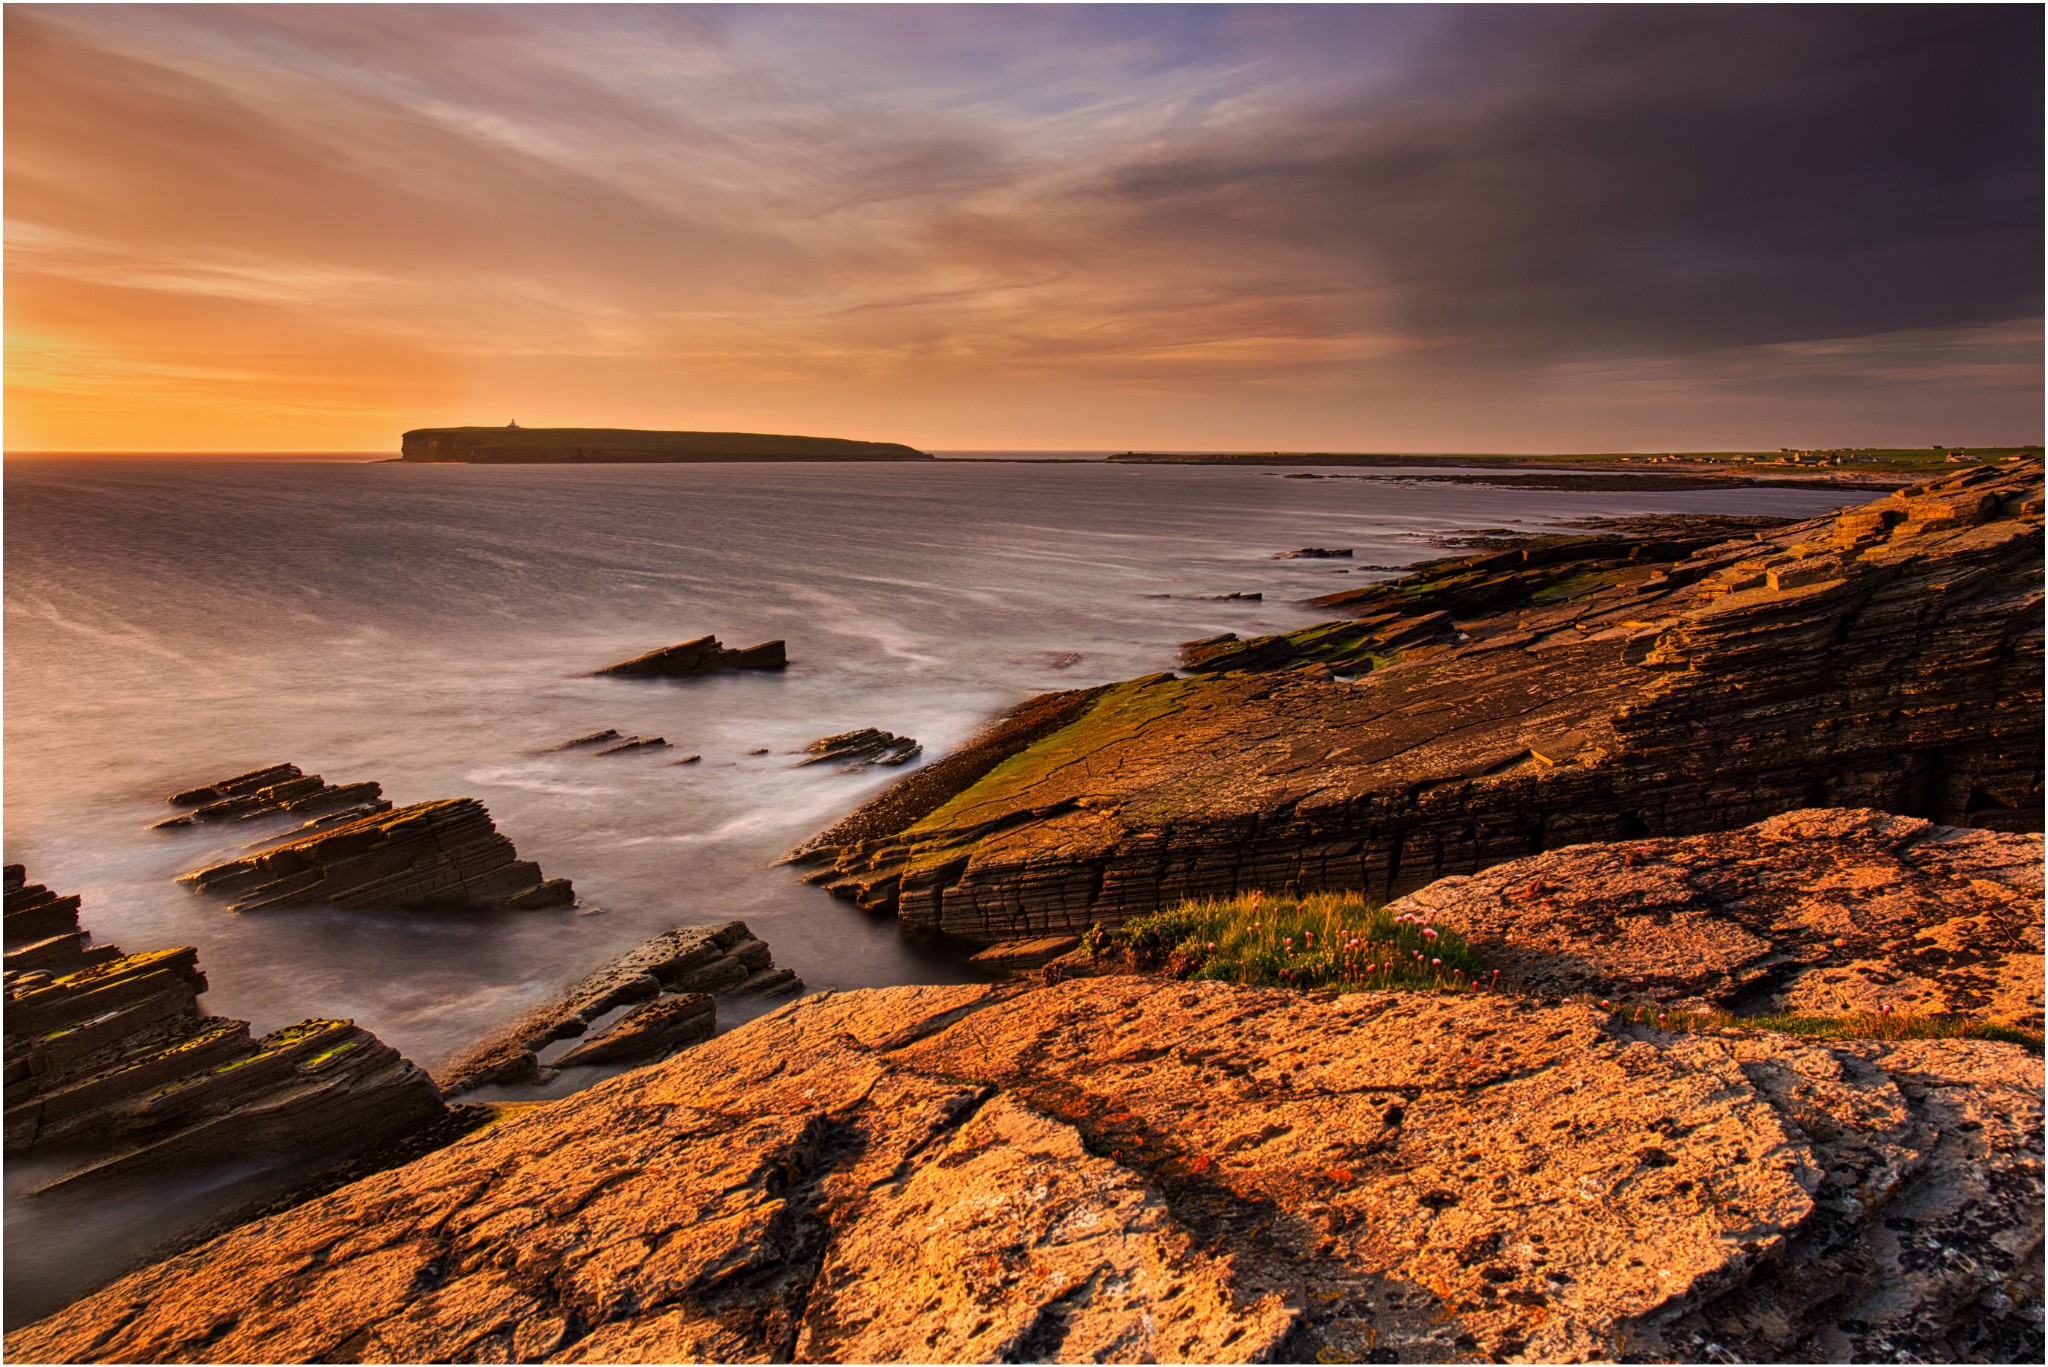 Brough of Birsay, Orkney - image by Robbie Rendall